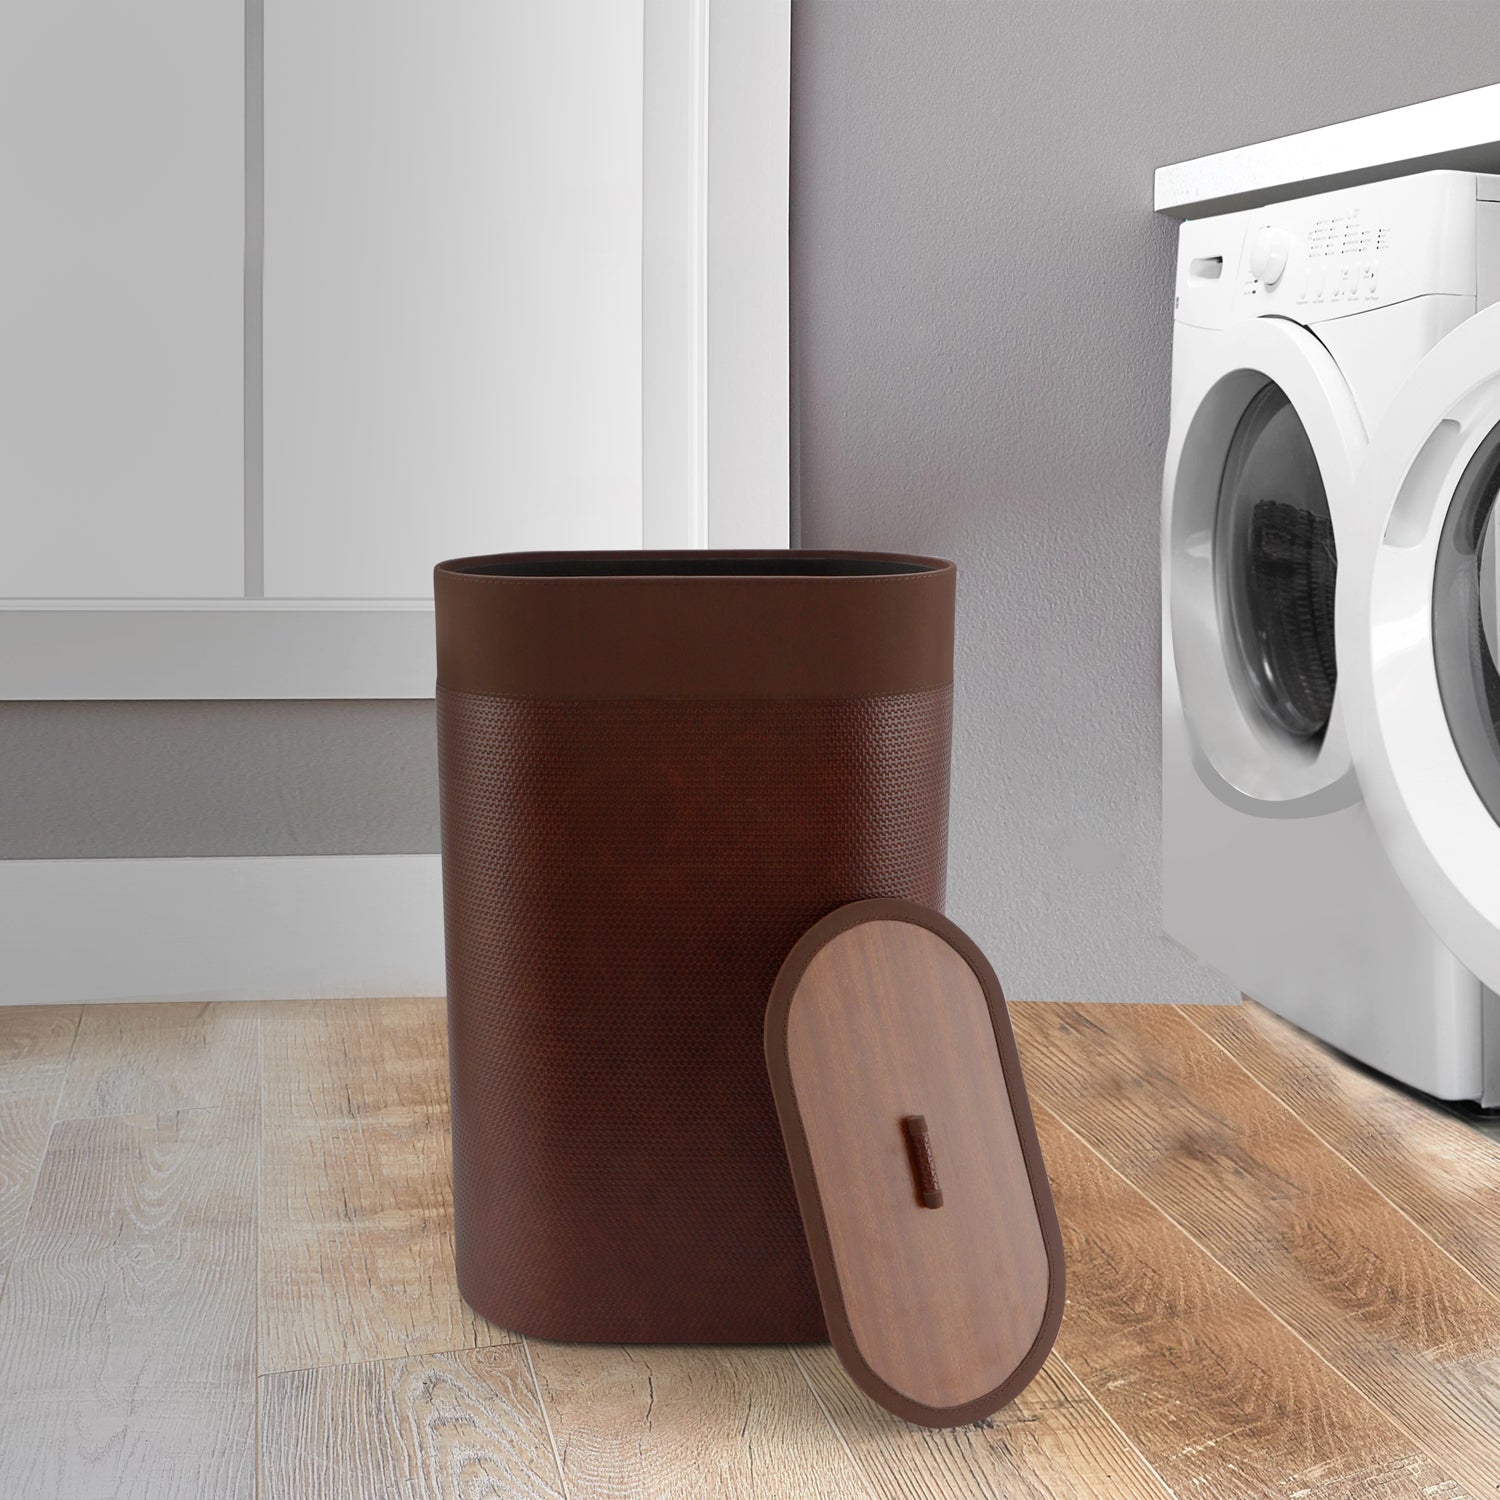 Laundry Bin - Brown Leatherette 1- The Home Co,